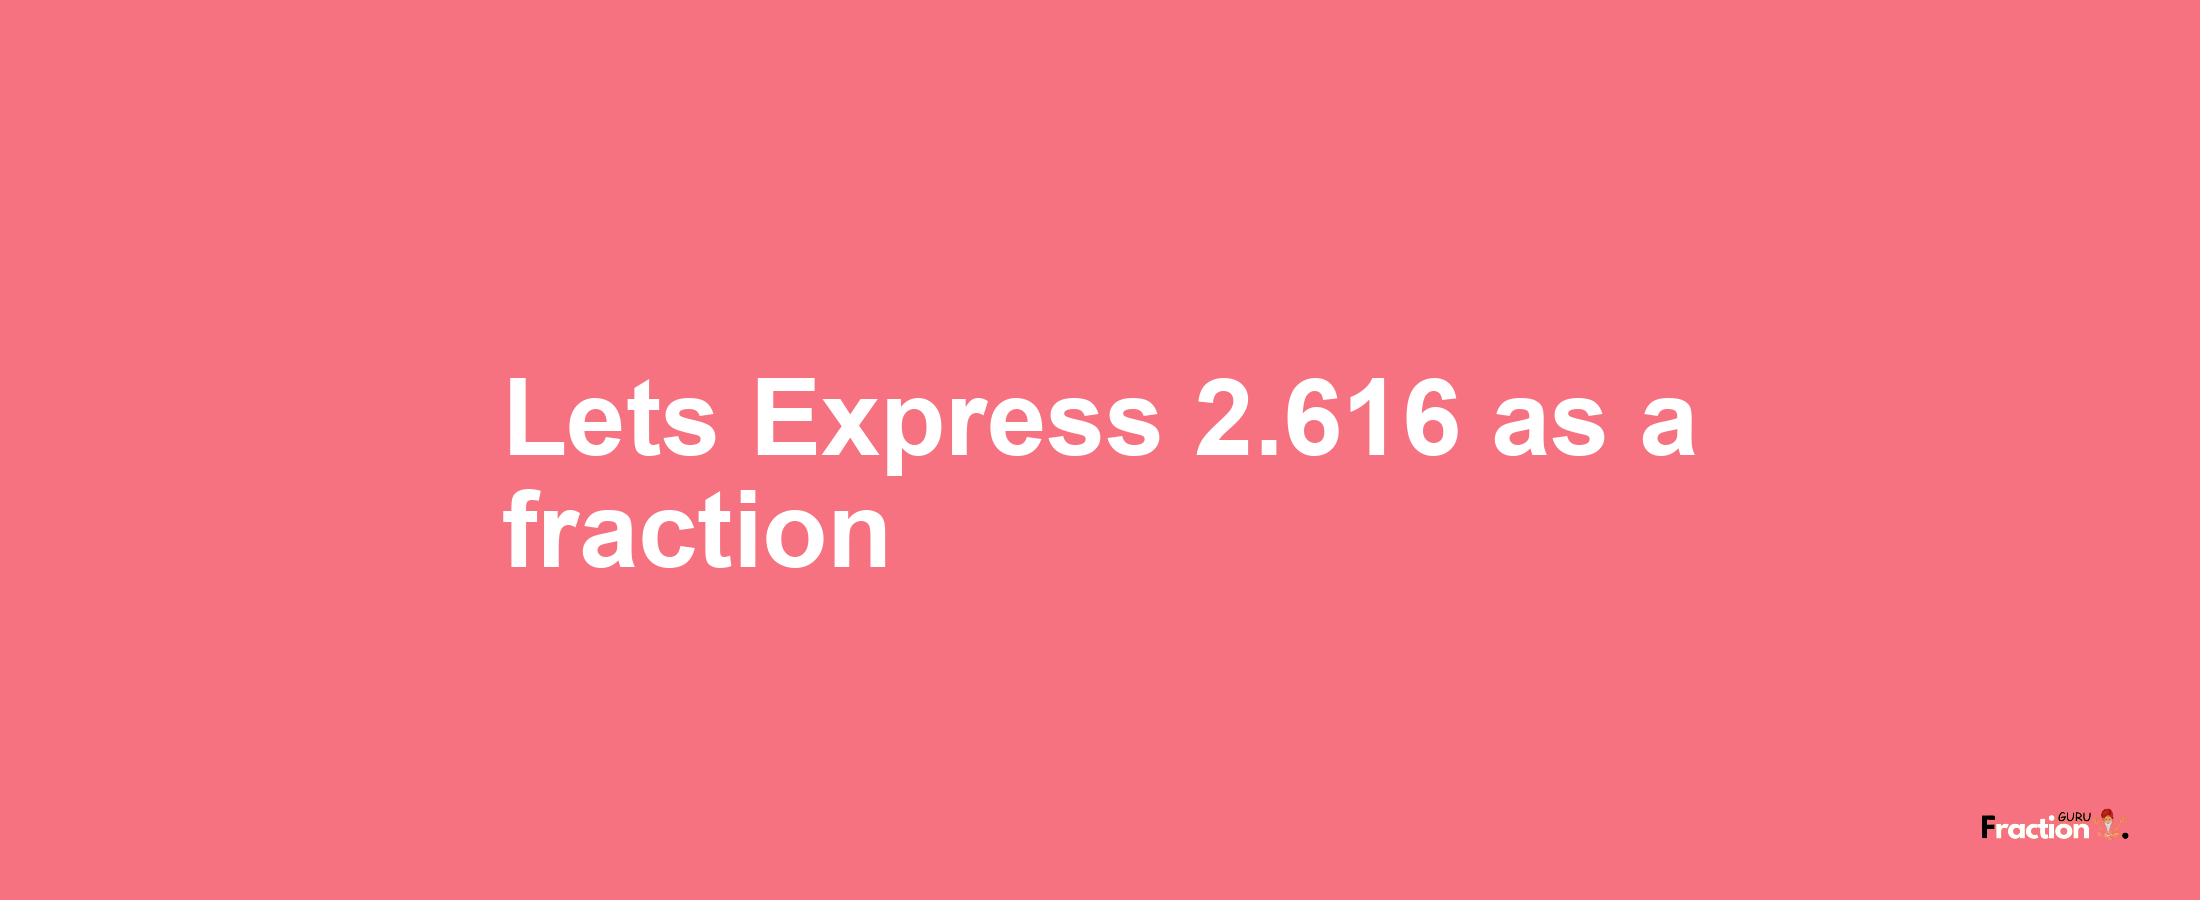 Lets Express 2.616 as afraction